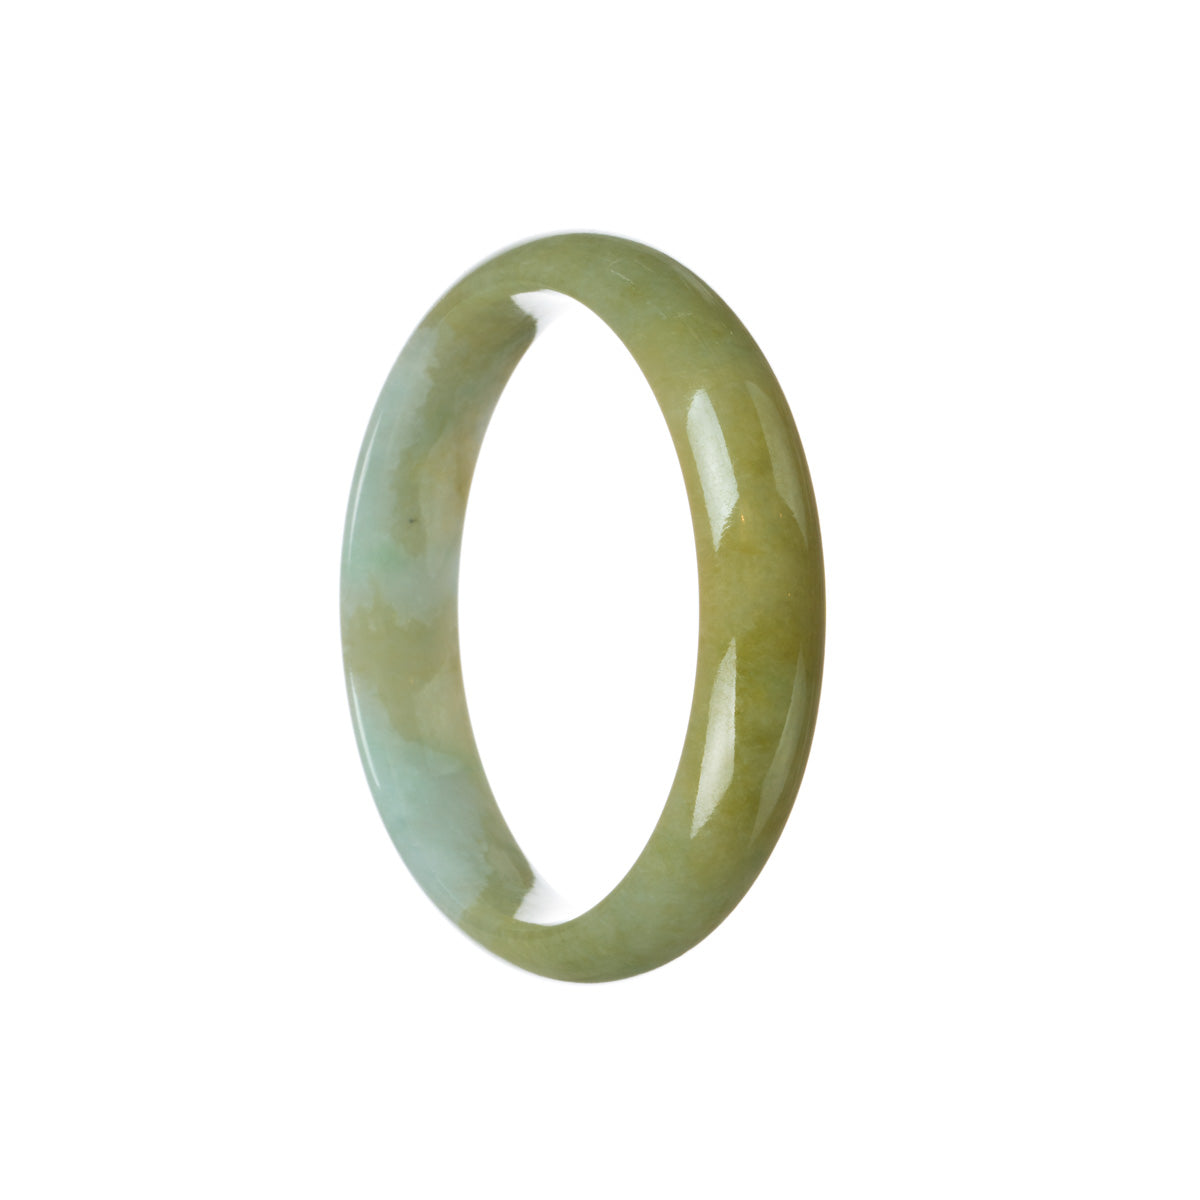 A close-up photo of a beautiful jadeite jade bangle bracelet in a brownish olive green color, featuring a white patch. The bracelet is certified Grade A and has a unique half moon shape measuring 59mm in size. It is a stunning piece of jewelry from MAYS GEMS.